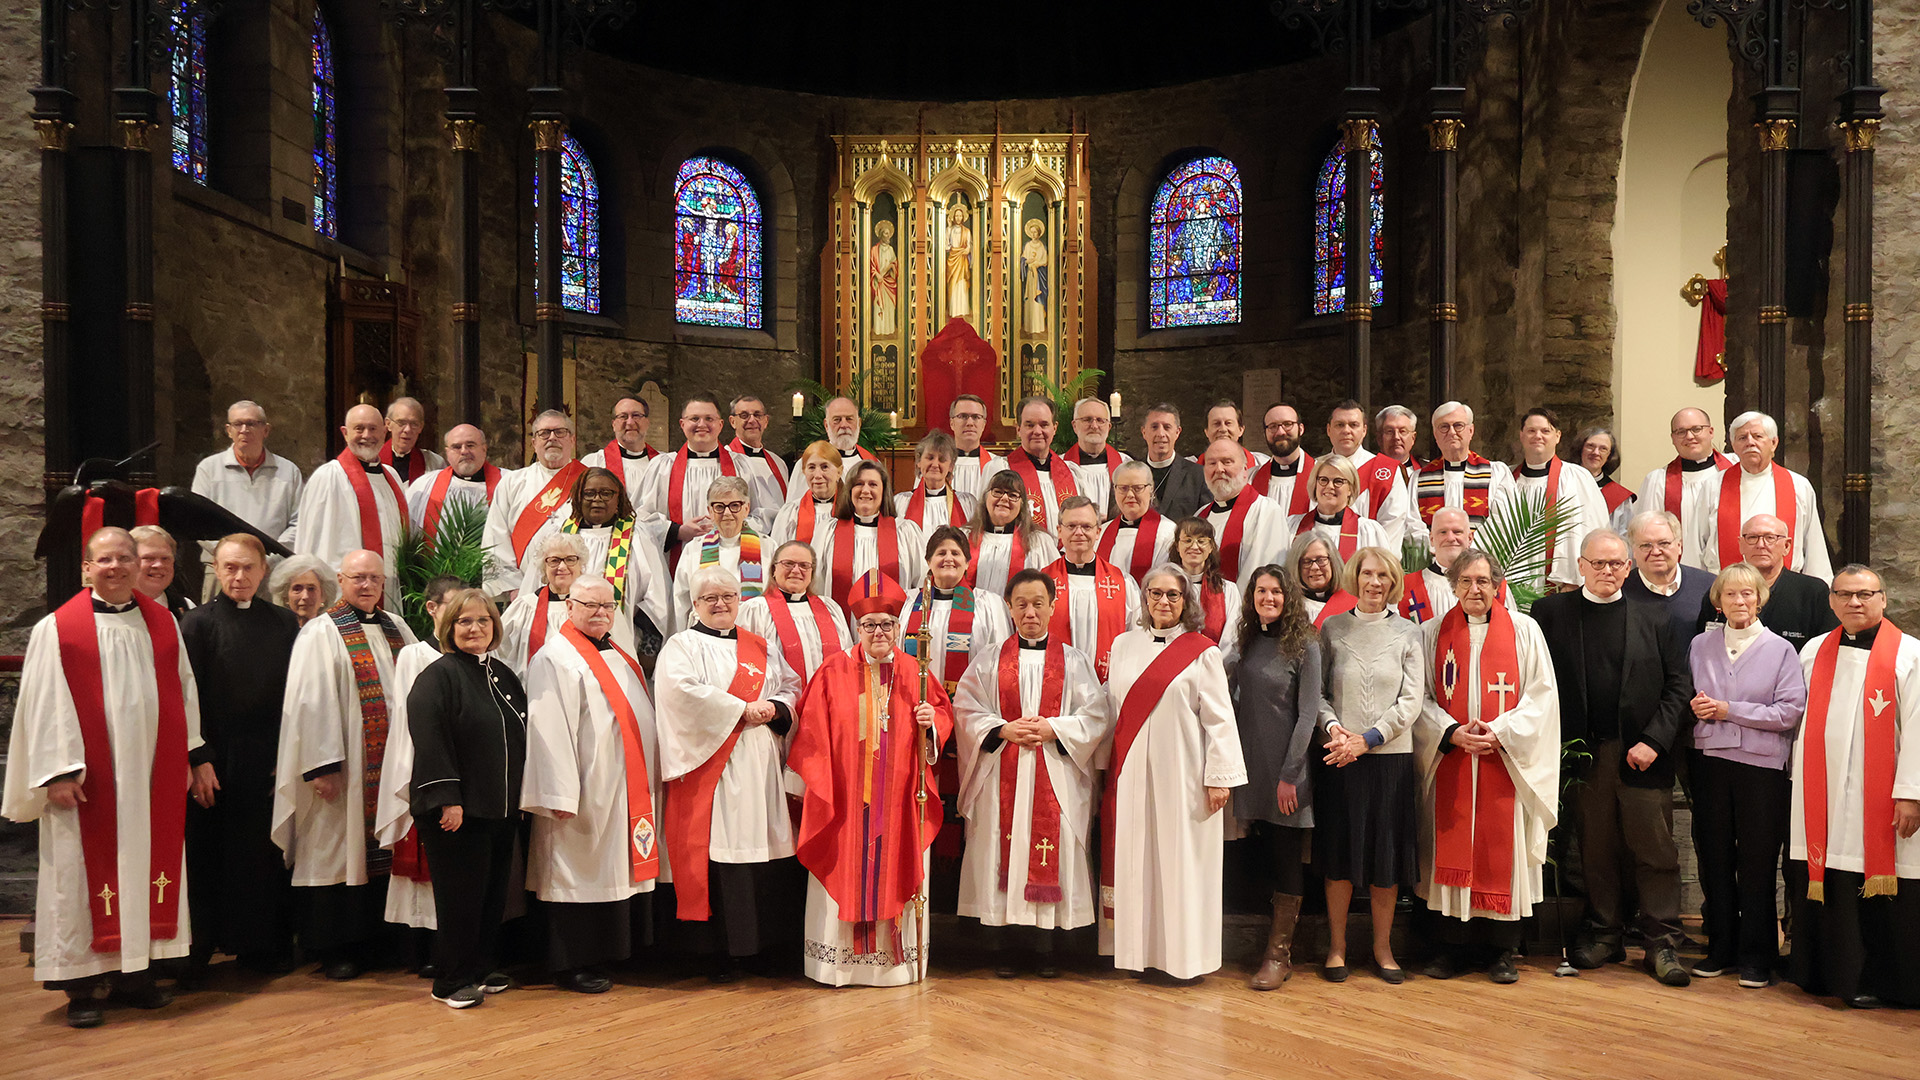 Clergy group photo of Blessing of Oils